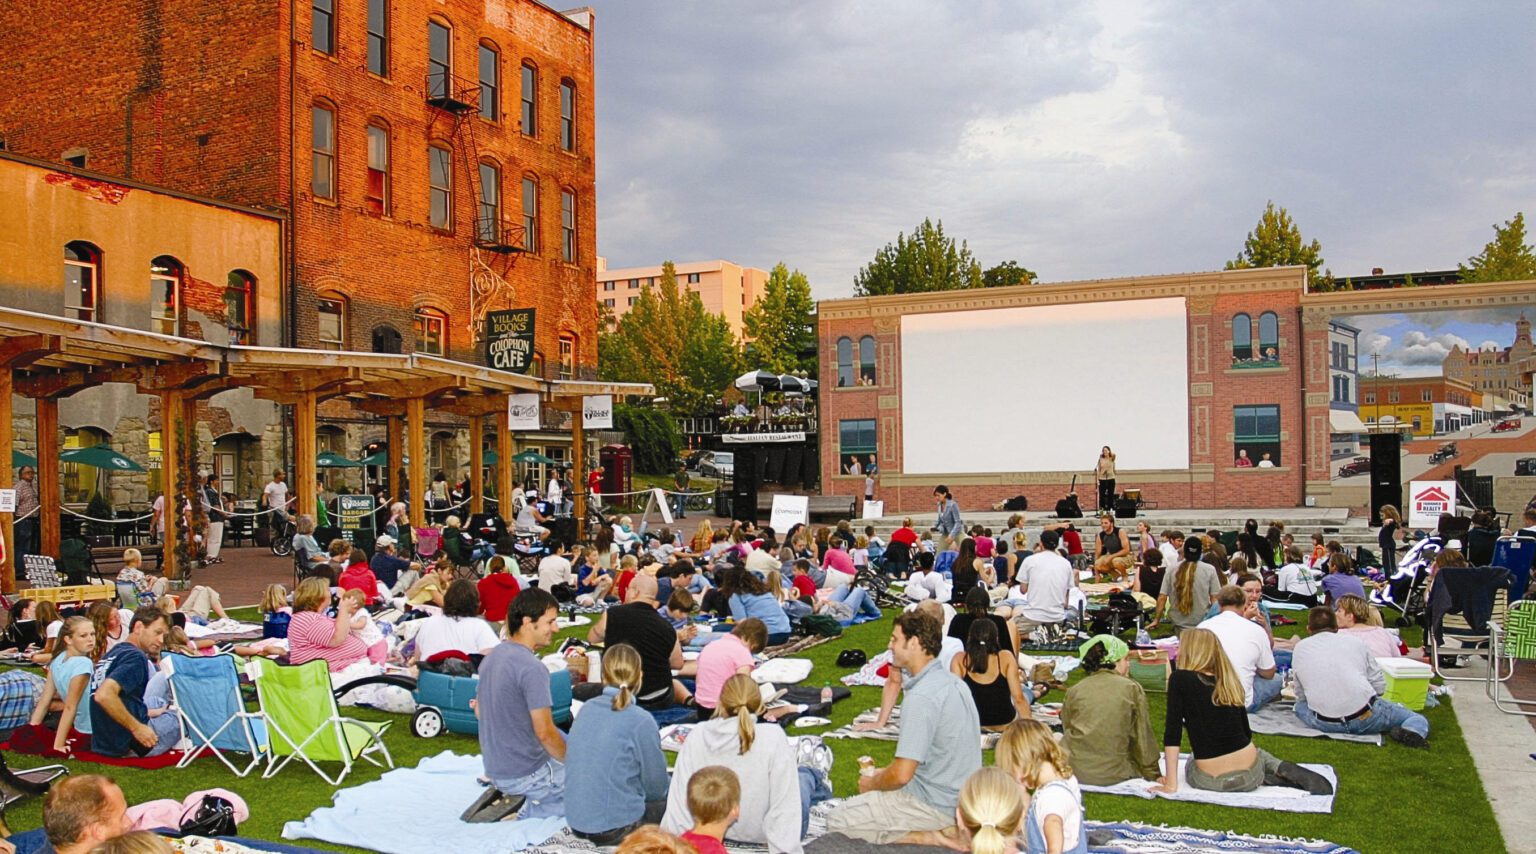 The Fairhaven Outdoor Cinema returns to the Fairhaven Village Green. The event kicks off Saturday